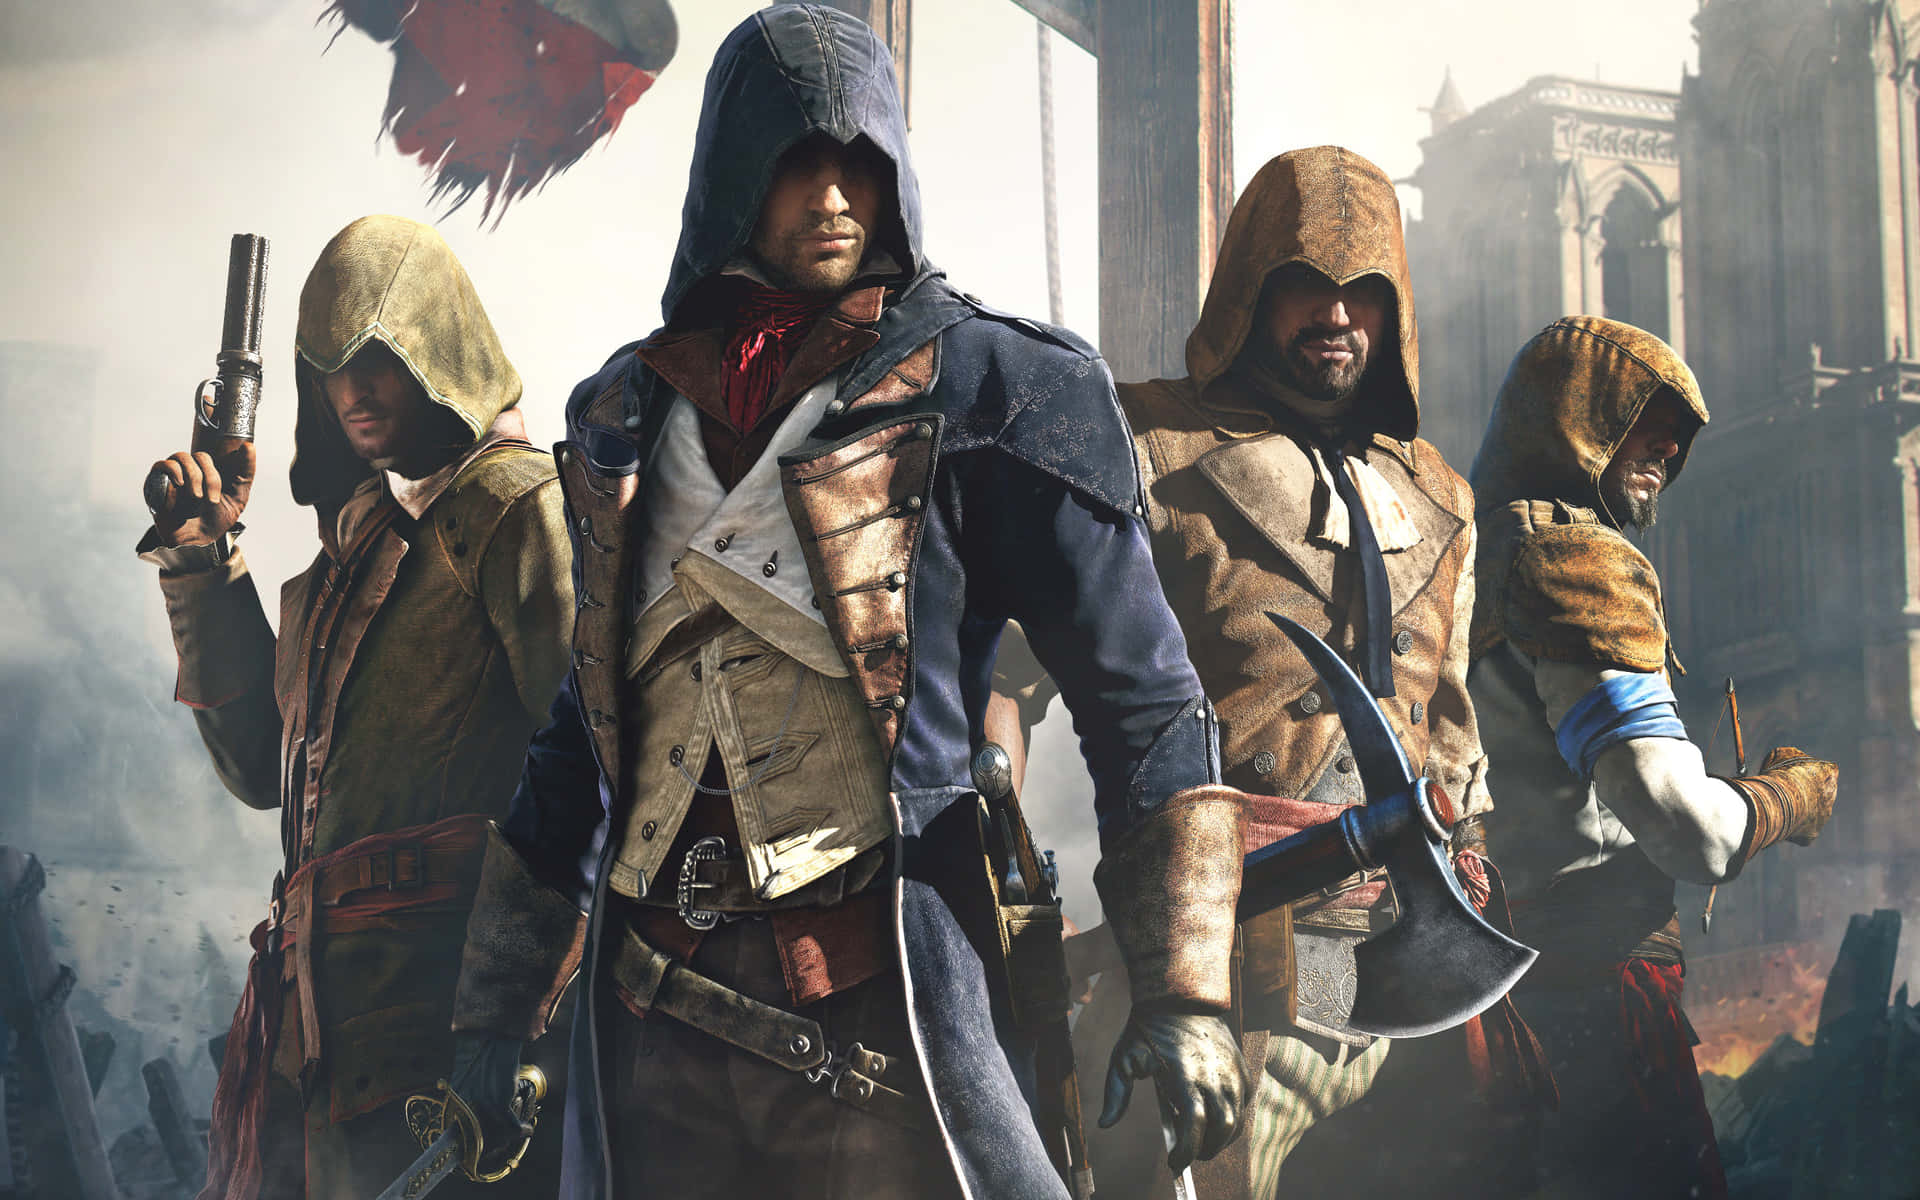 Iconic Assassin's Creed characters united in an epic wallpaper Wallpaper